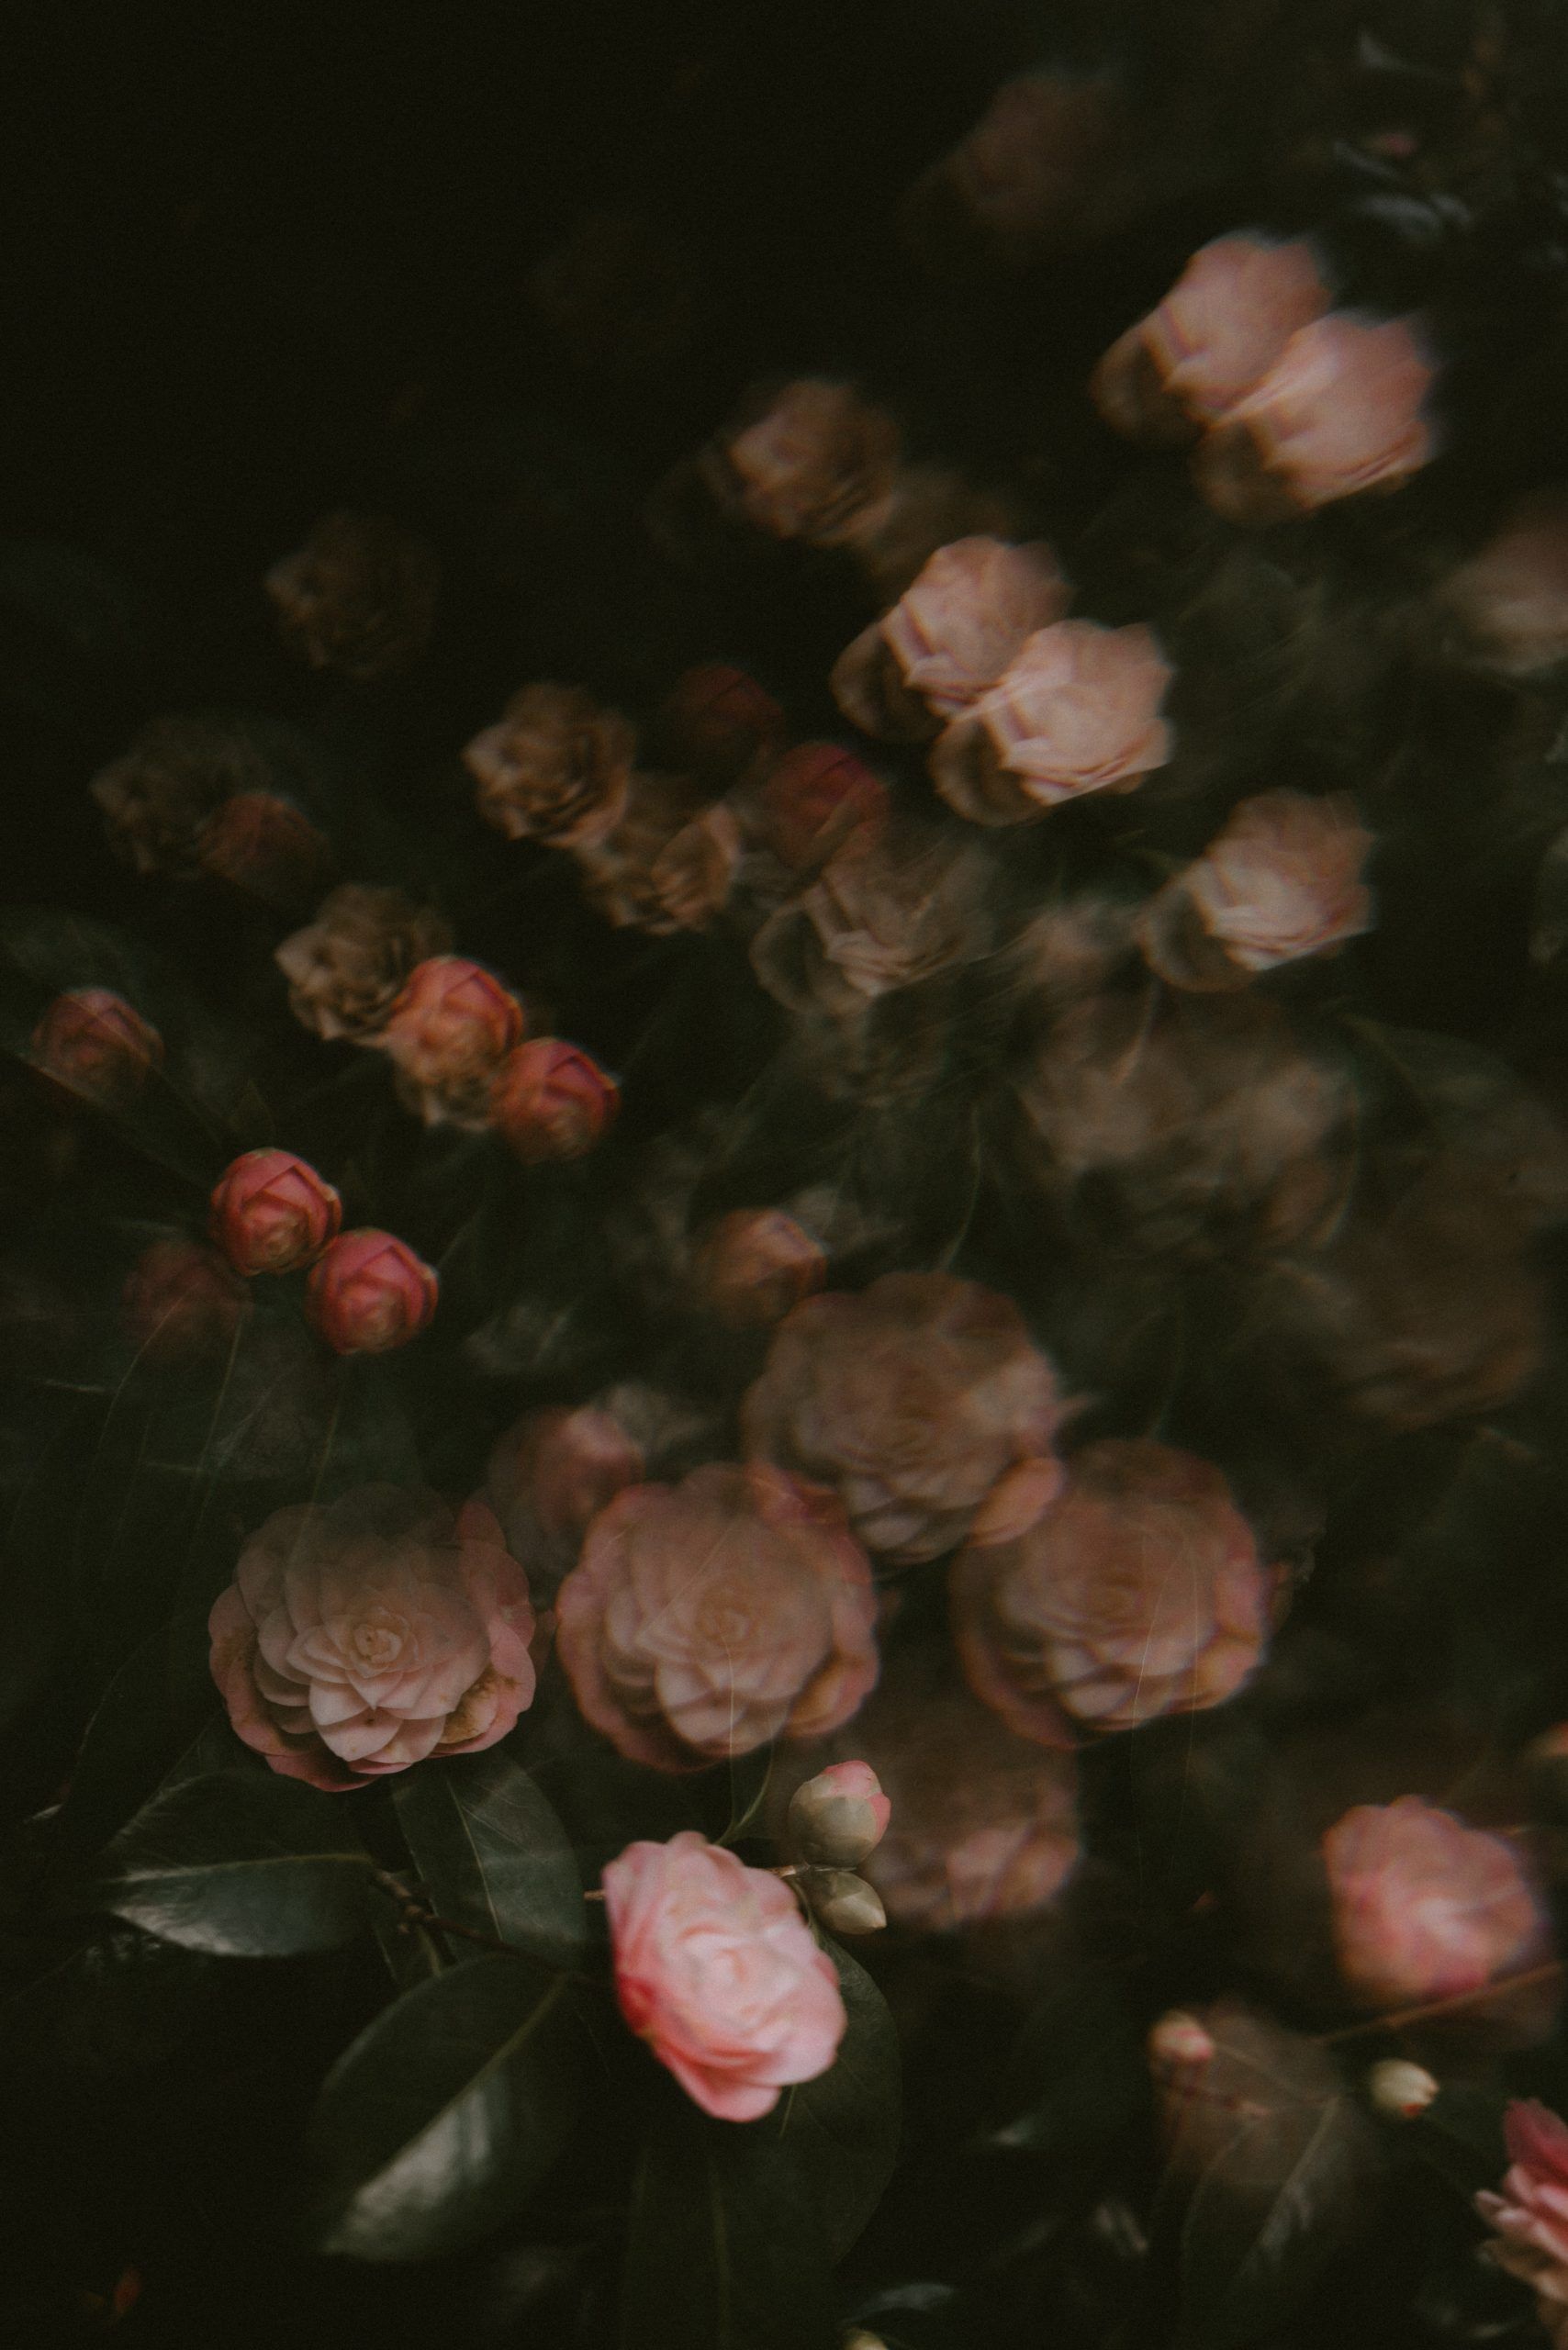 A group of pink flowers in a garden - Black